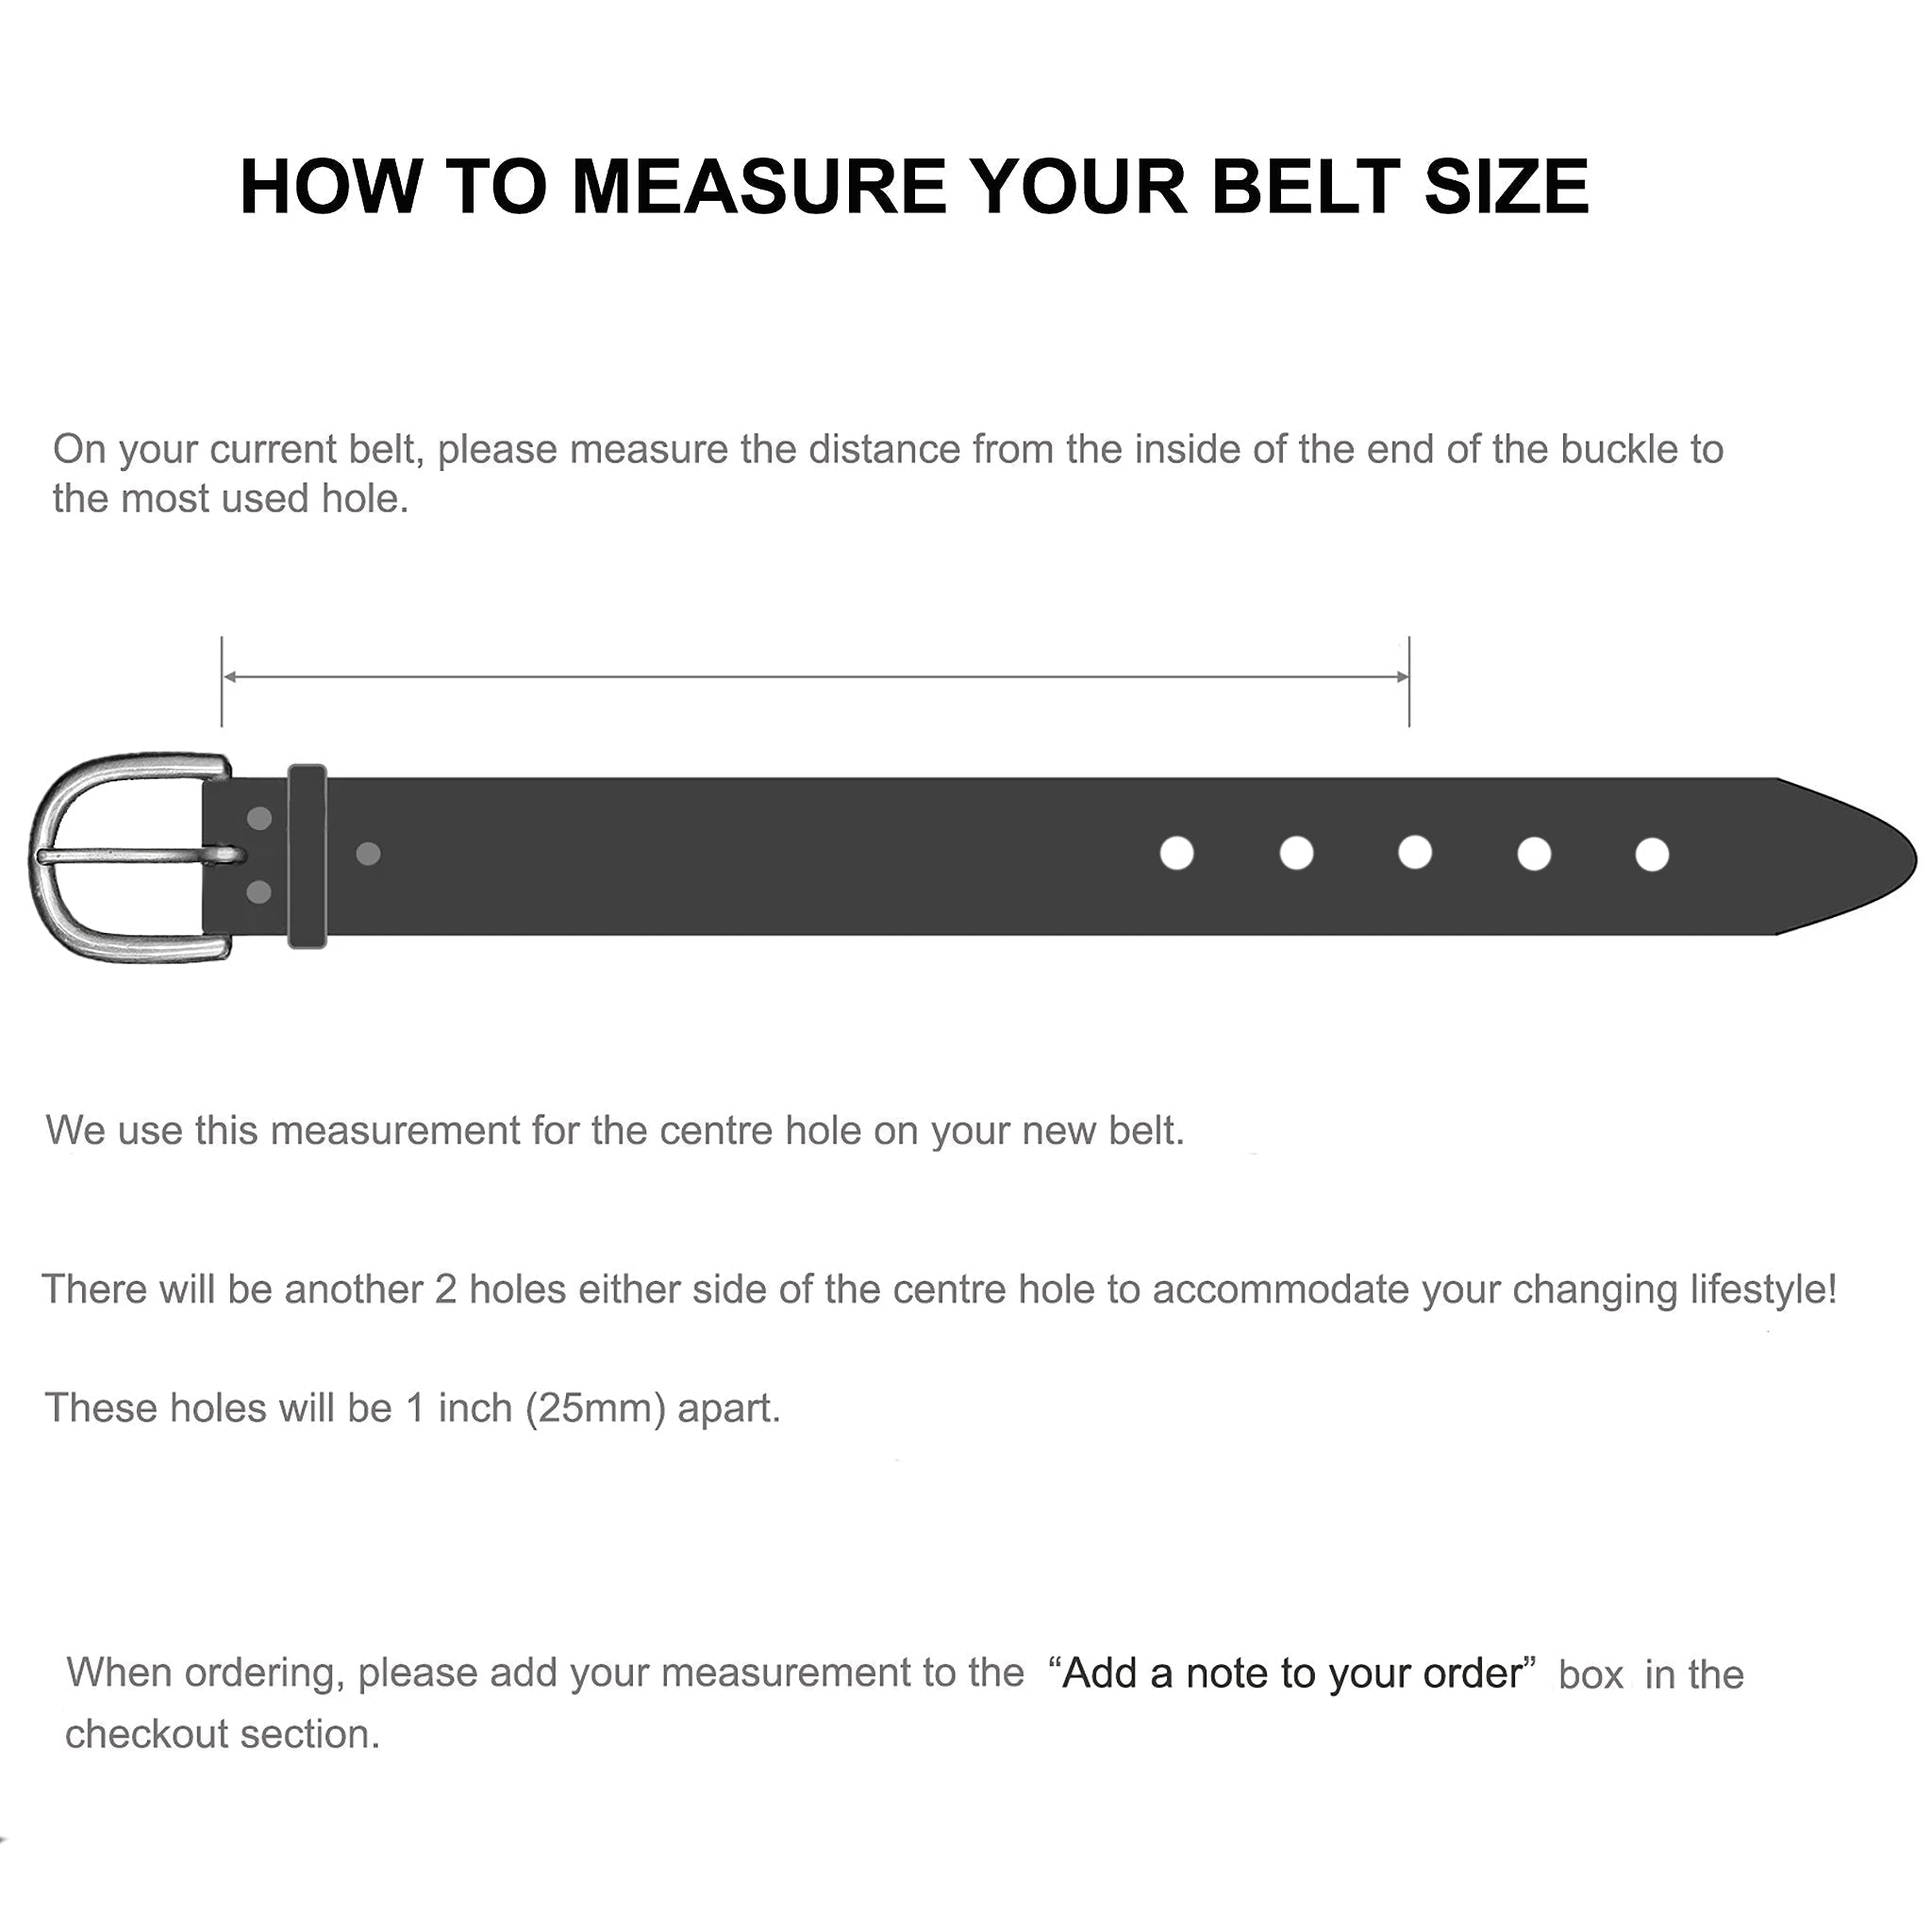 How to Measure Your Belt Size by The Viking Dragon